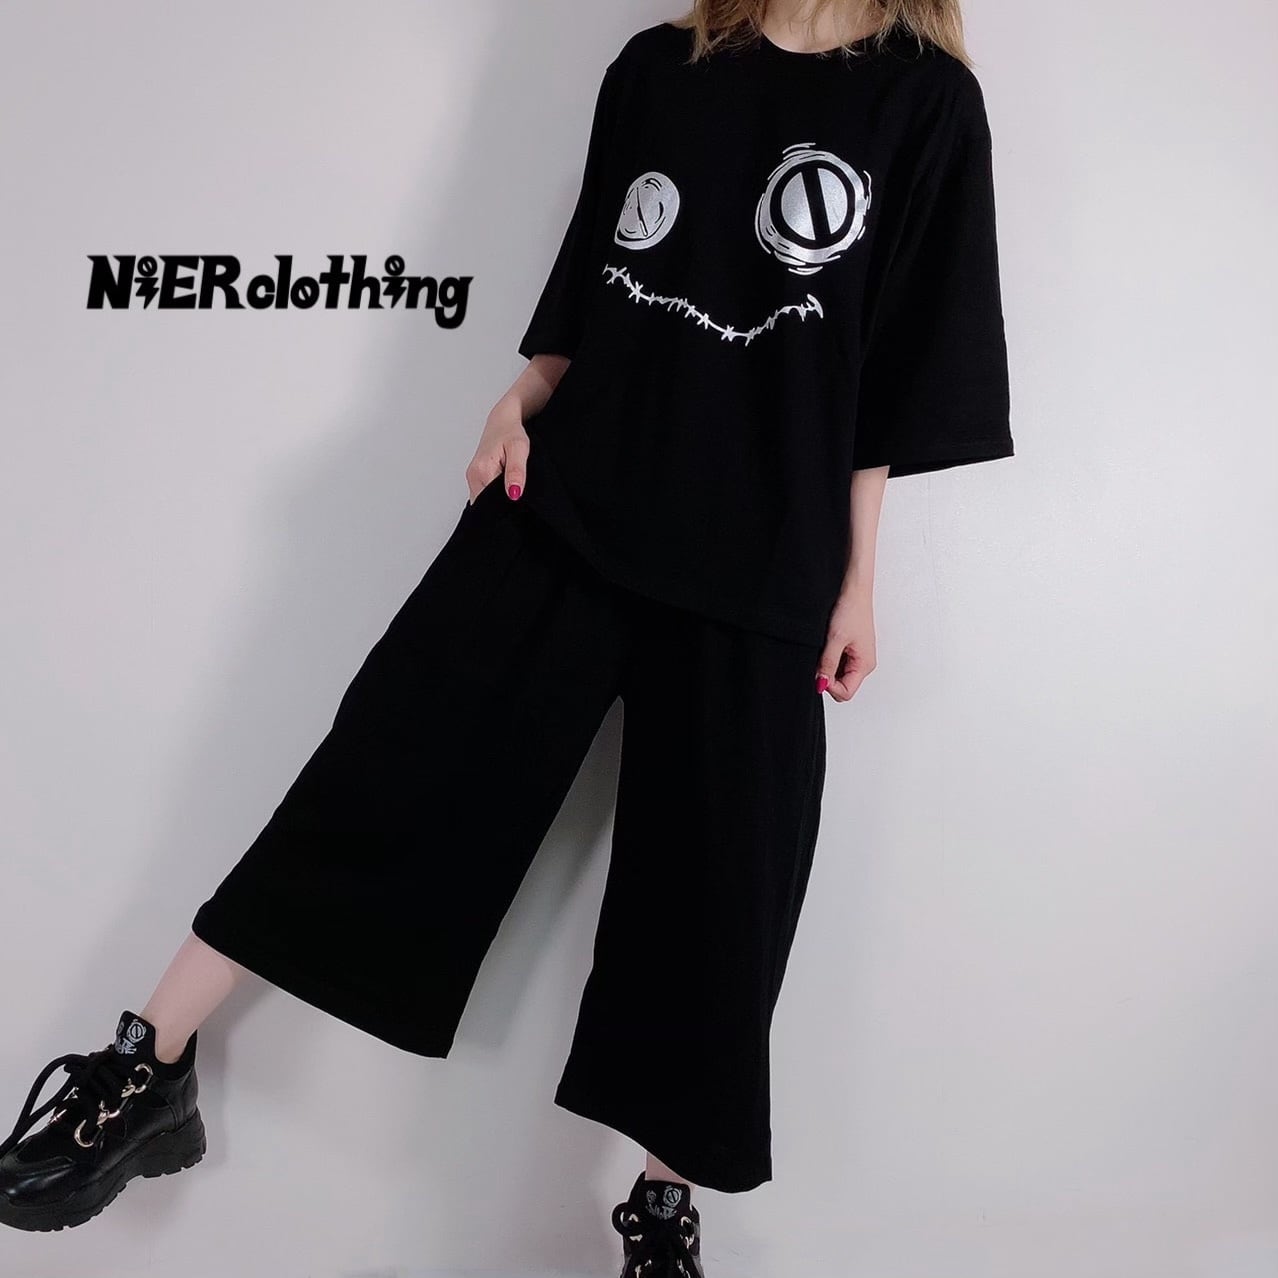 NieRオリジナルセットアップ[LADIES] | NIER CLOTHING powered by BASE